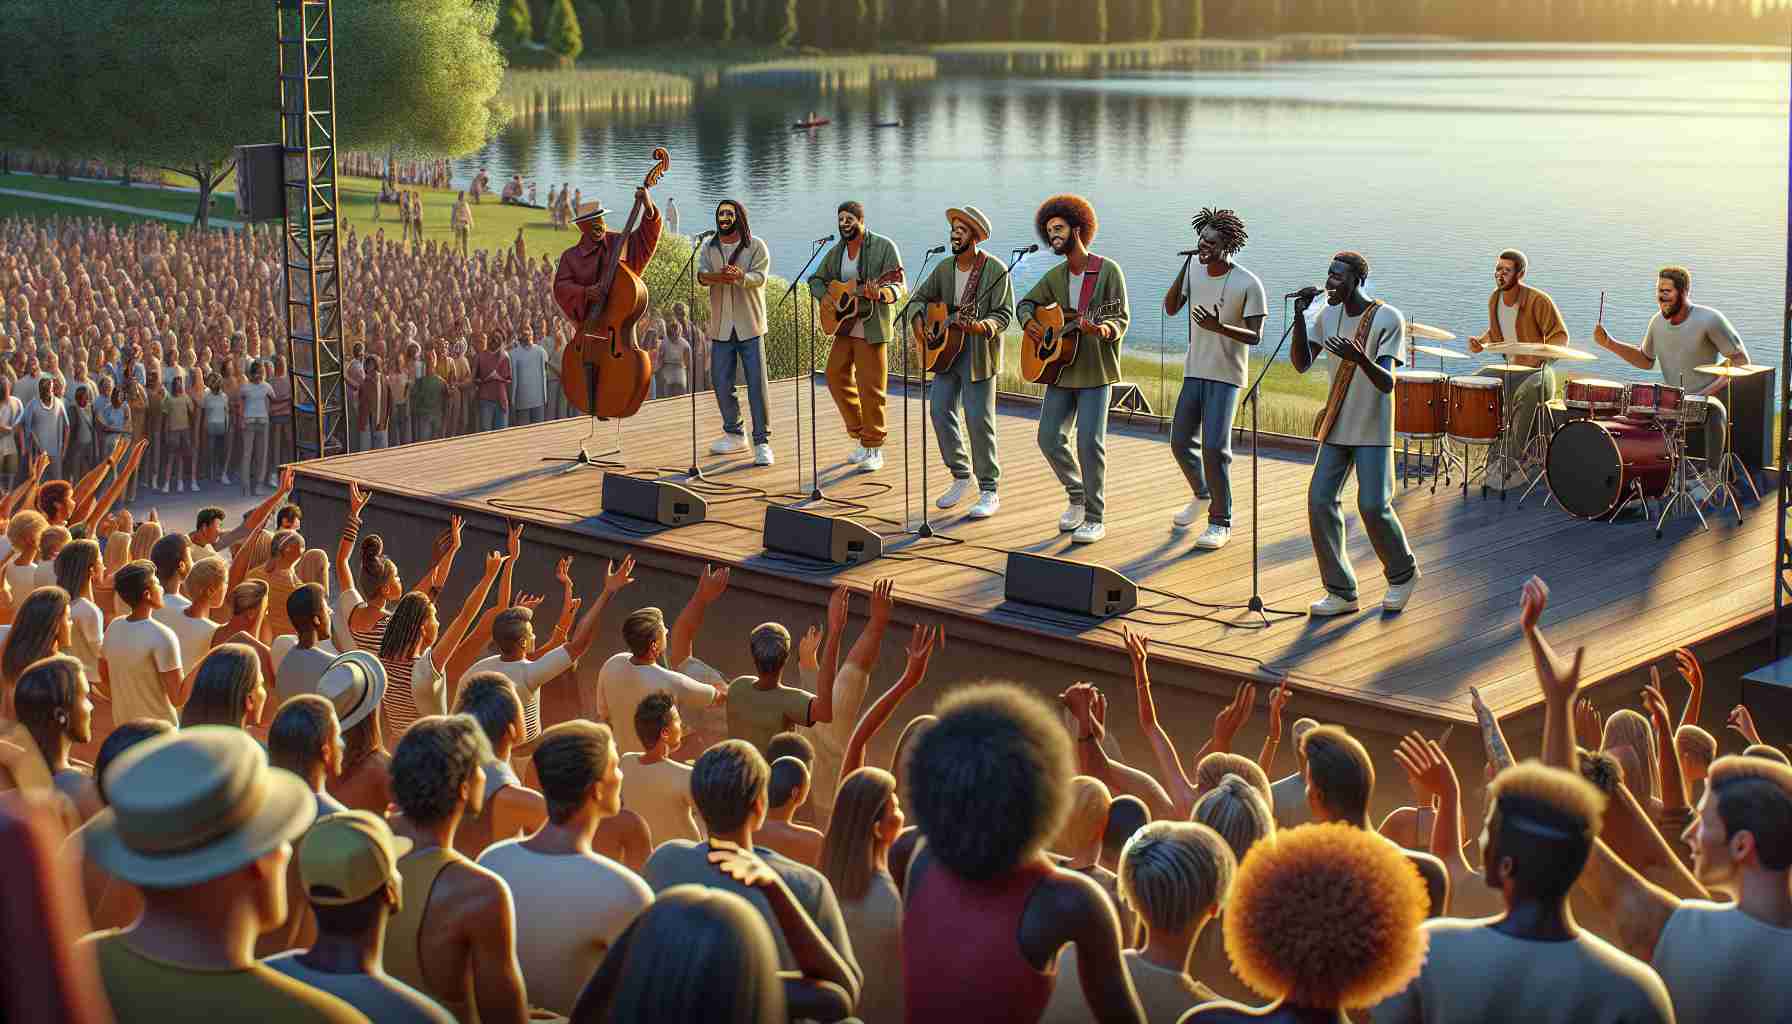 High-definition photorealistic image of a lively summer music extravaganza happening at a lakeside amphitheater. Musicians of different descents, including Hispanic, Black, Middle-eastern, and Caucasian, are performing energetically on stage, strumming guitars, beating drums, and singing heartily. The audience is a diverse group of enthusiastic men and women of various descents and ages, their hands waving in rhythm with the music. The outdoor amphitheater is set against a beautiful lake backdrop, the waters reflecting the golden, fading rays of a summer evening.